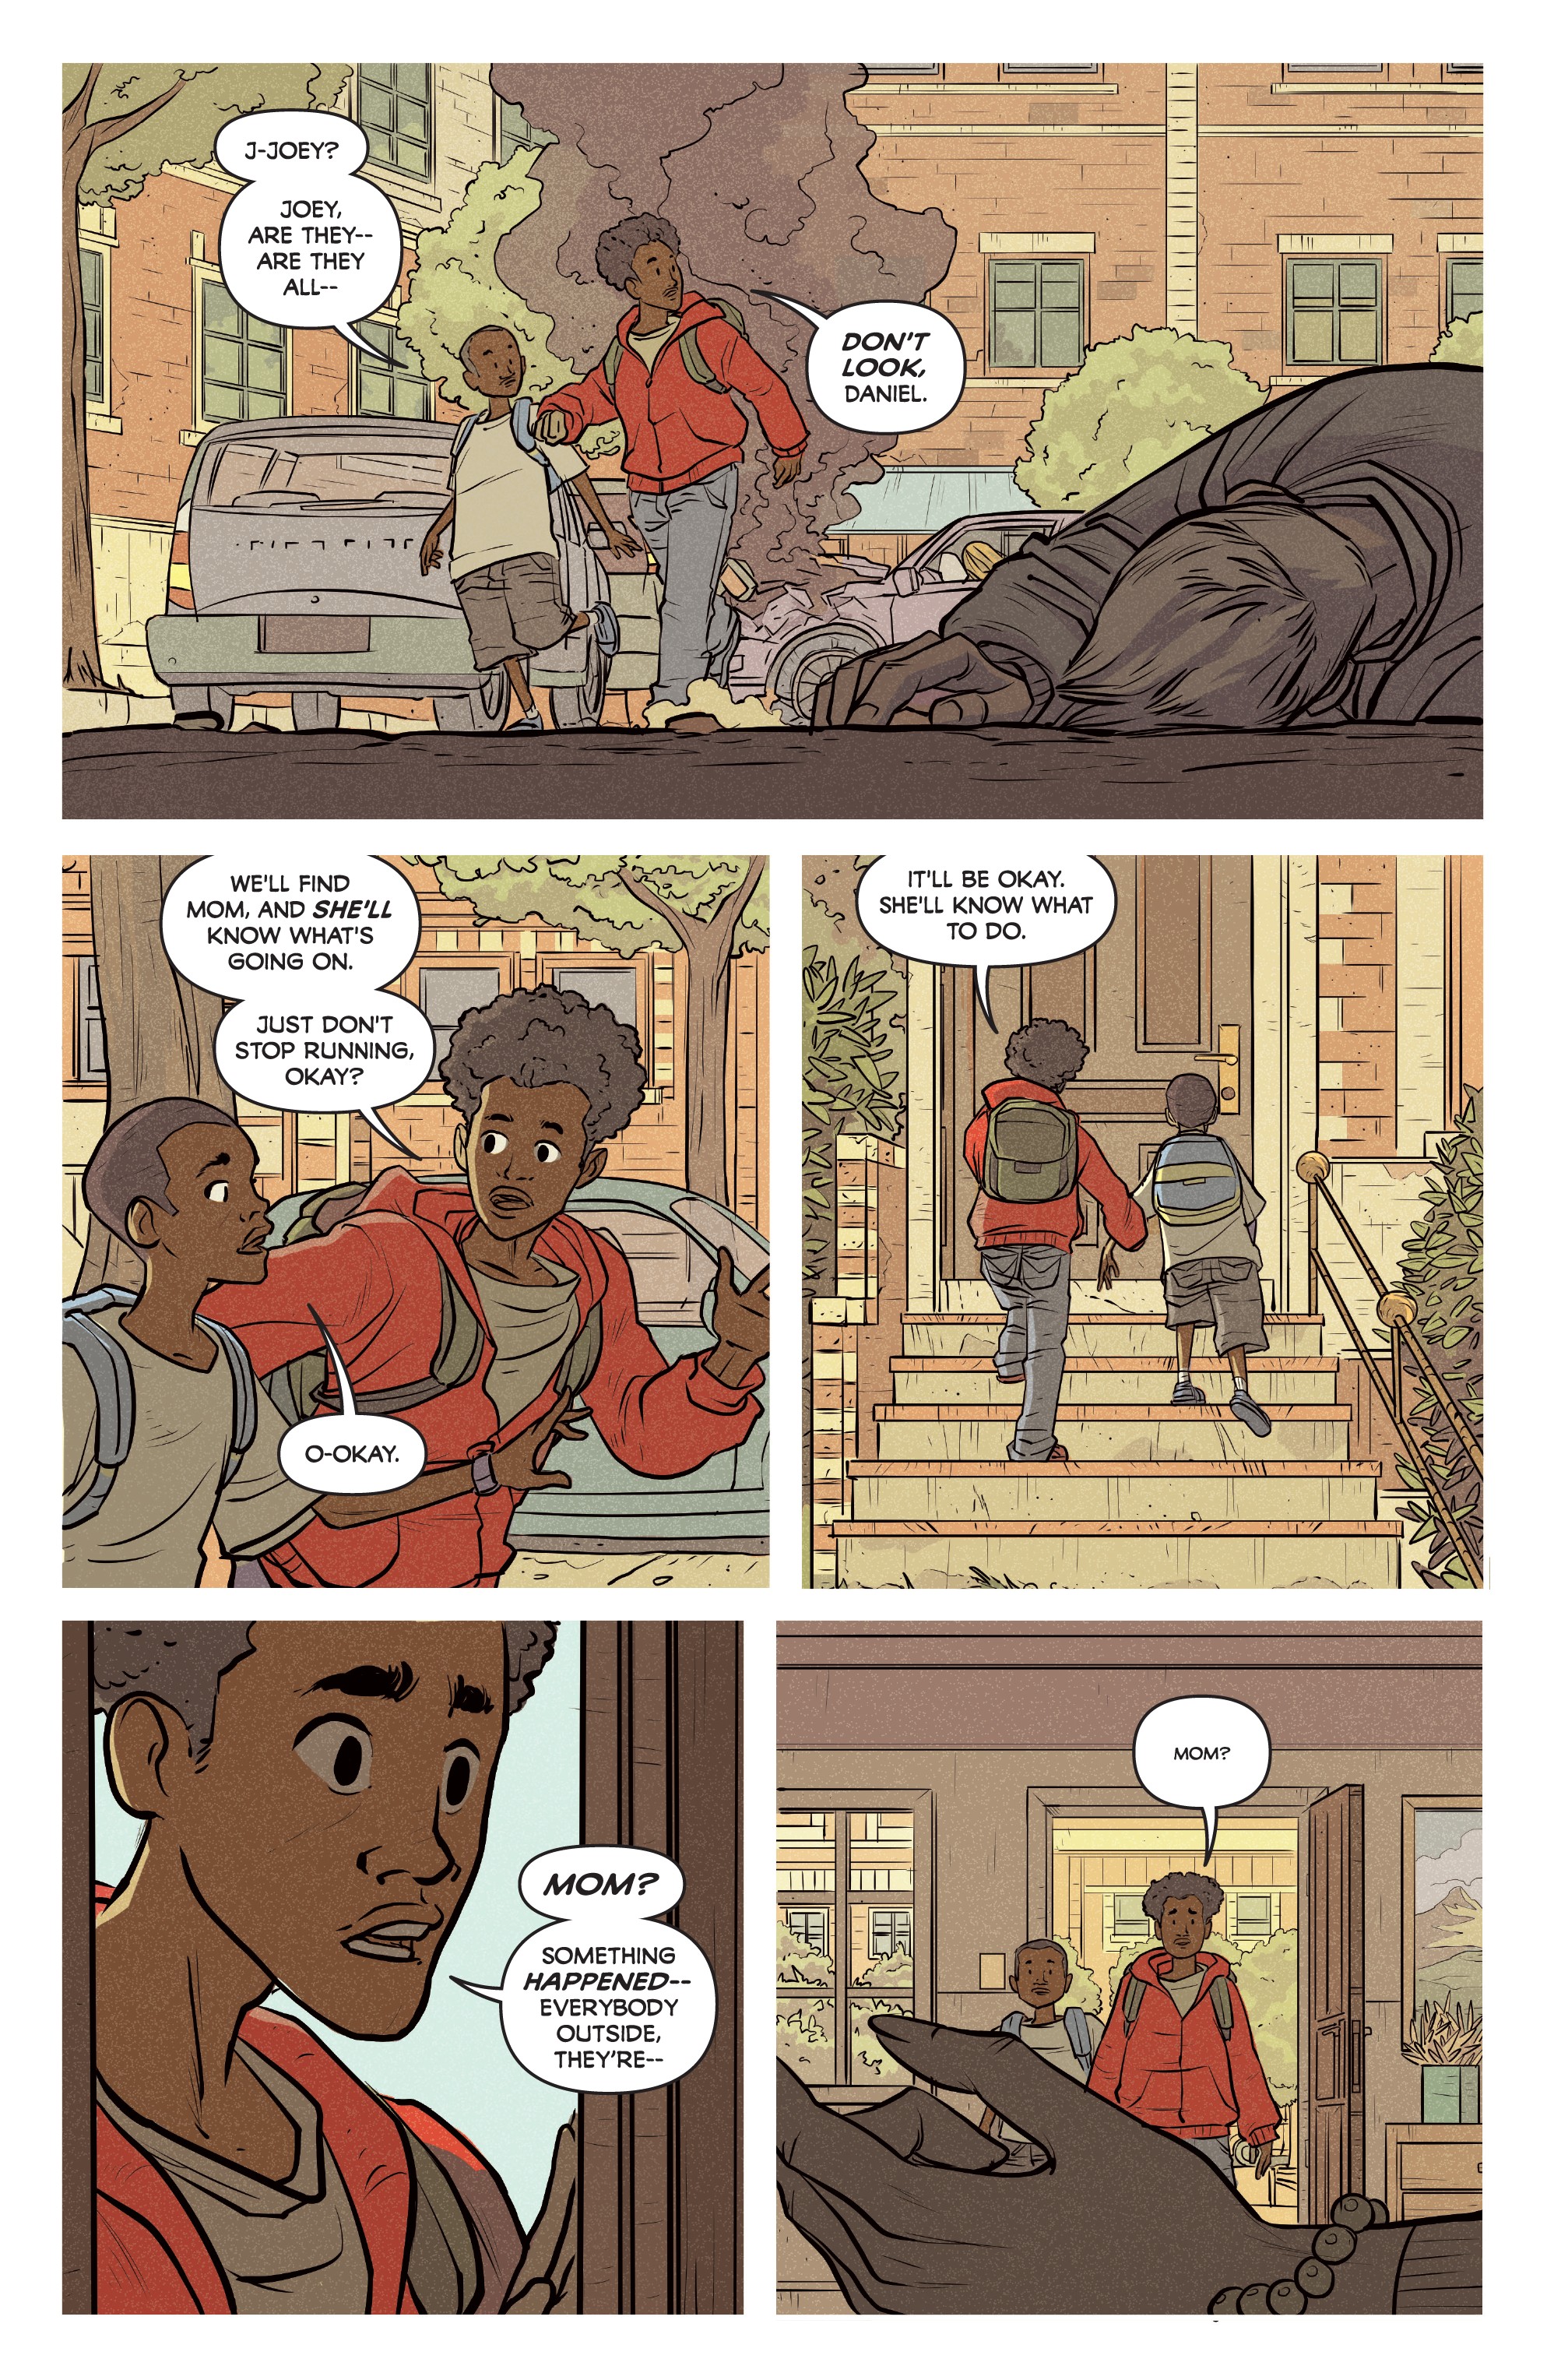 Orphan Age (2019-): Chapter 1 - Page 3